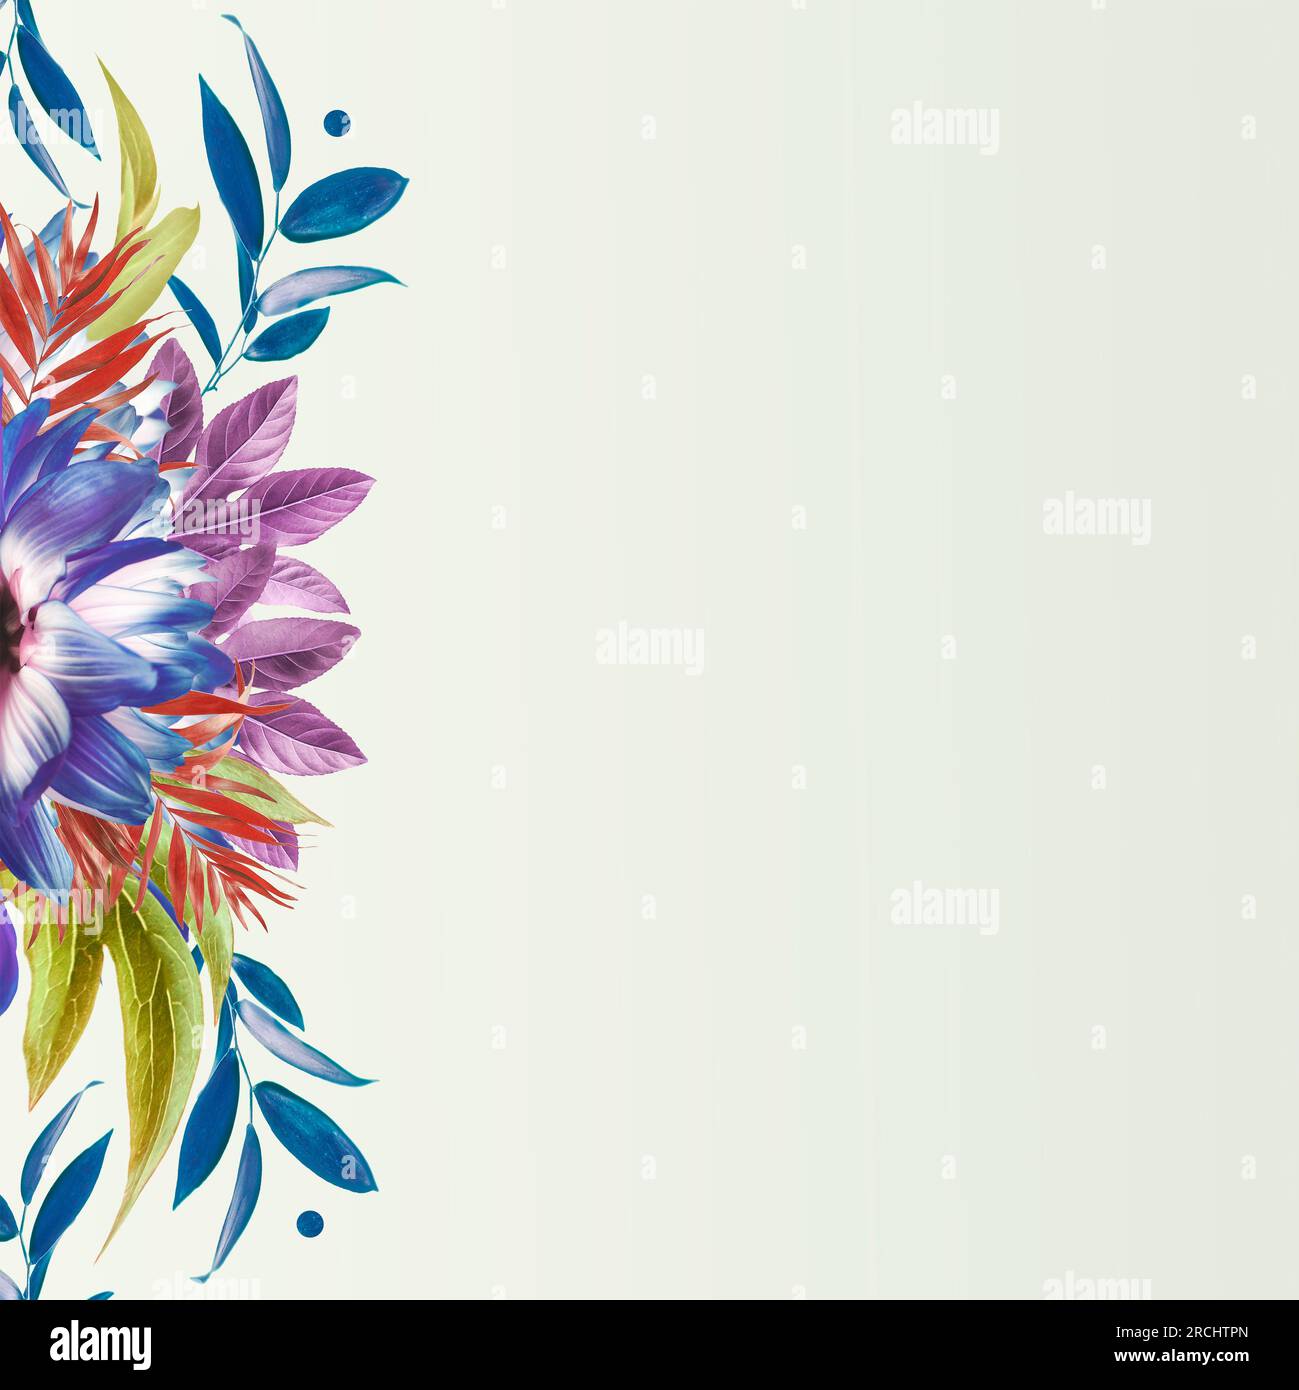 Floral border composing with flowers bloom and various leaves. Stock Photo